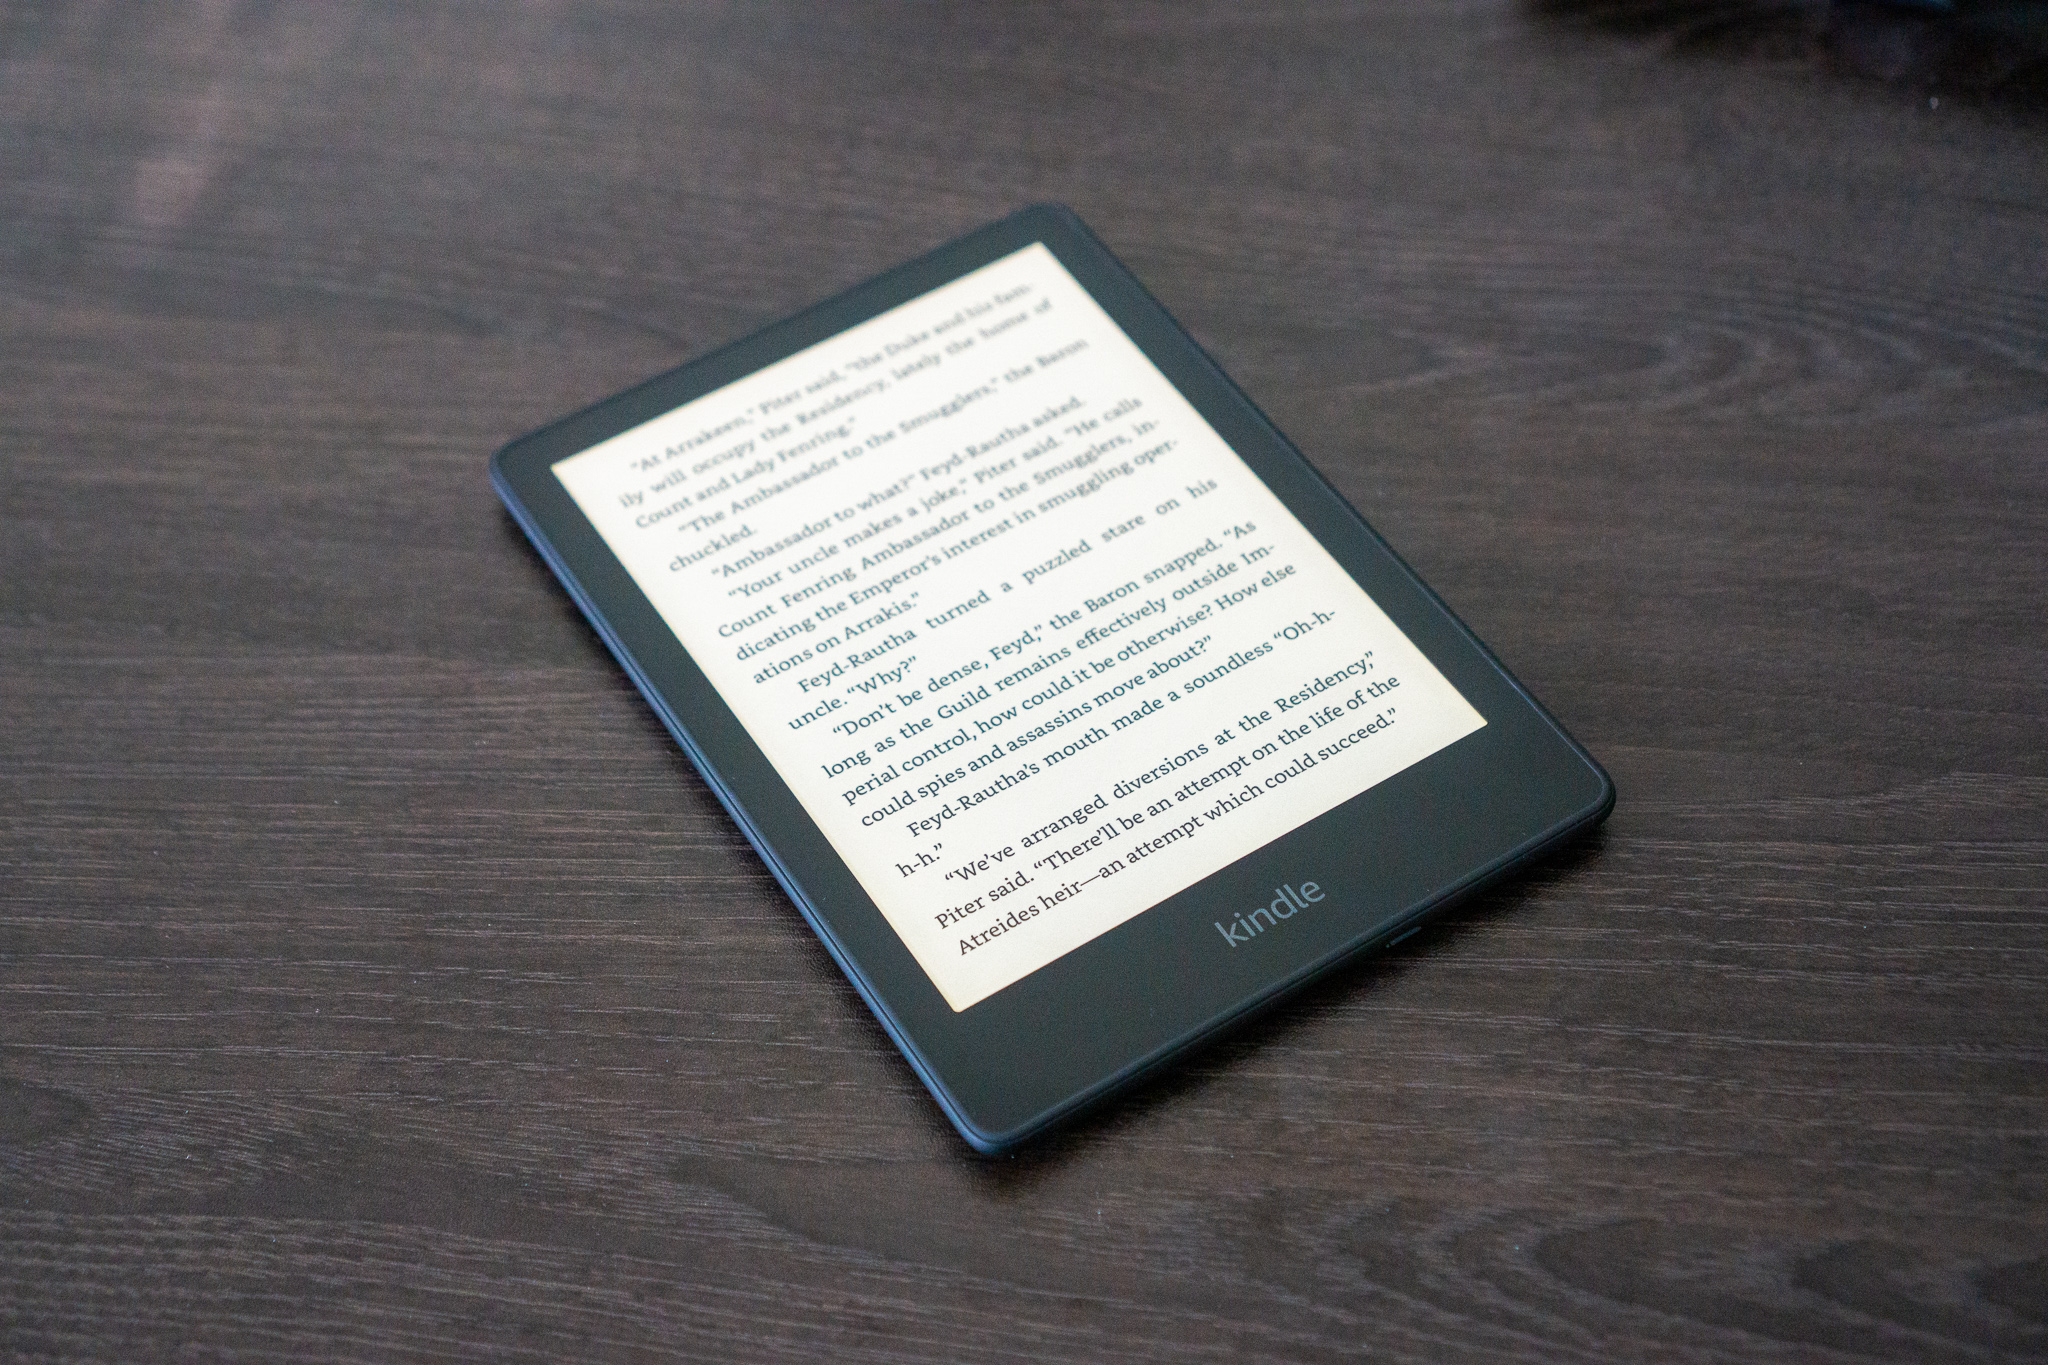 The Kindle Paperwhite sat on a table.